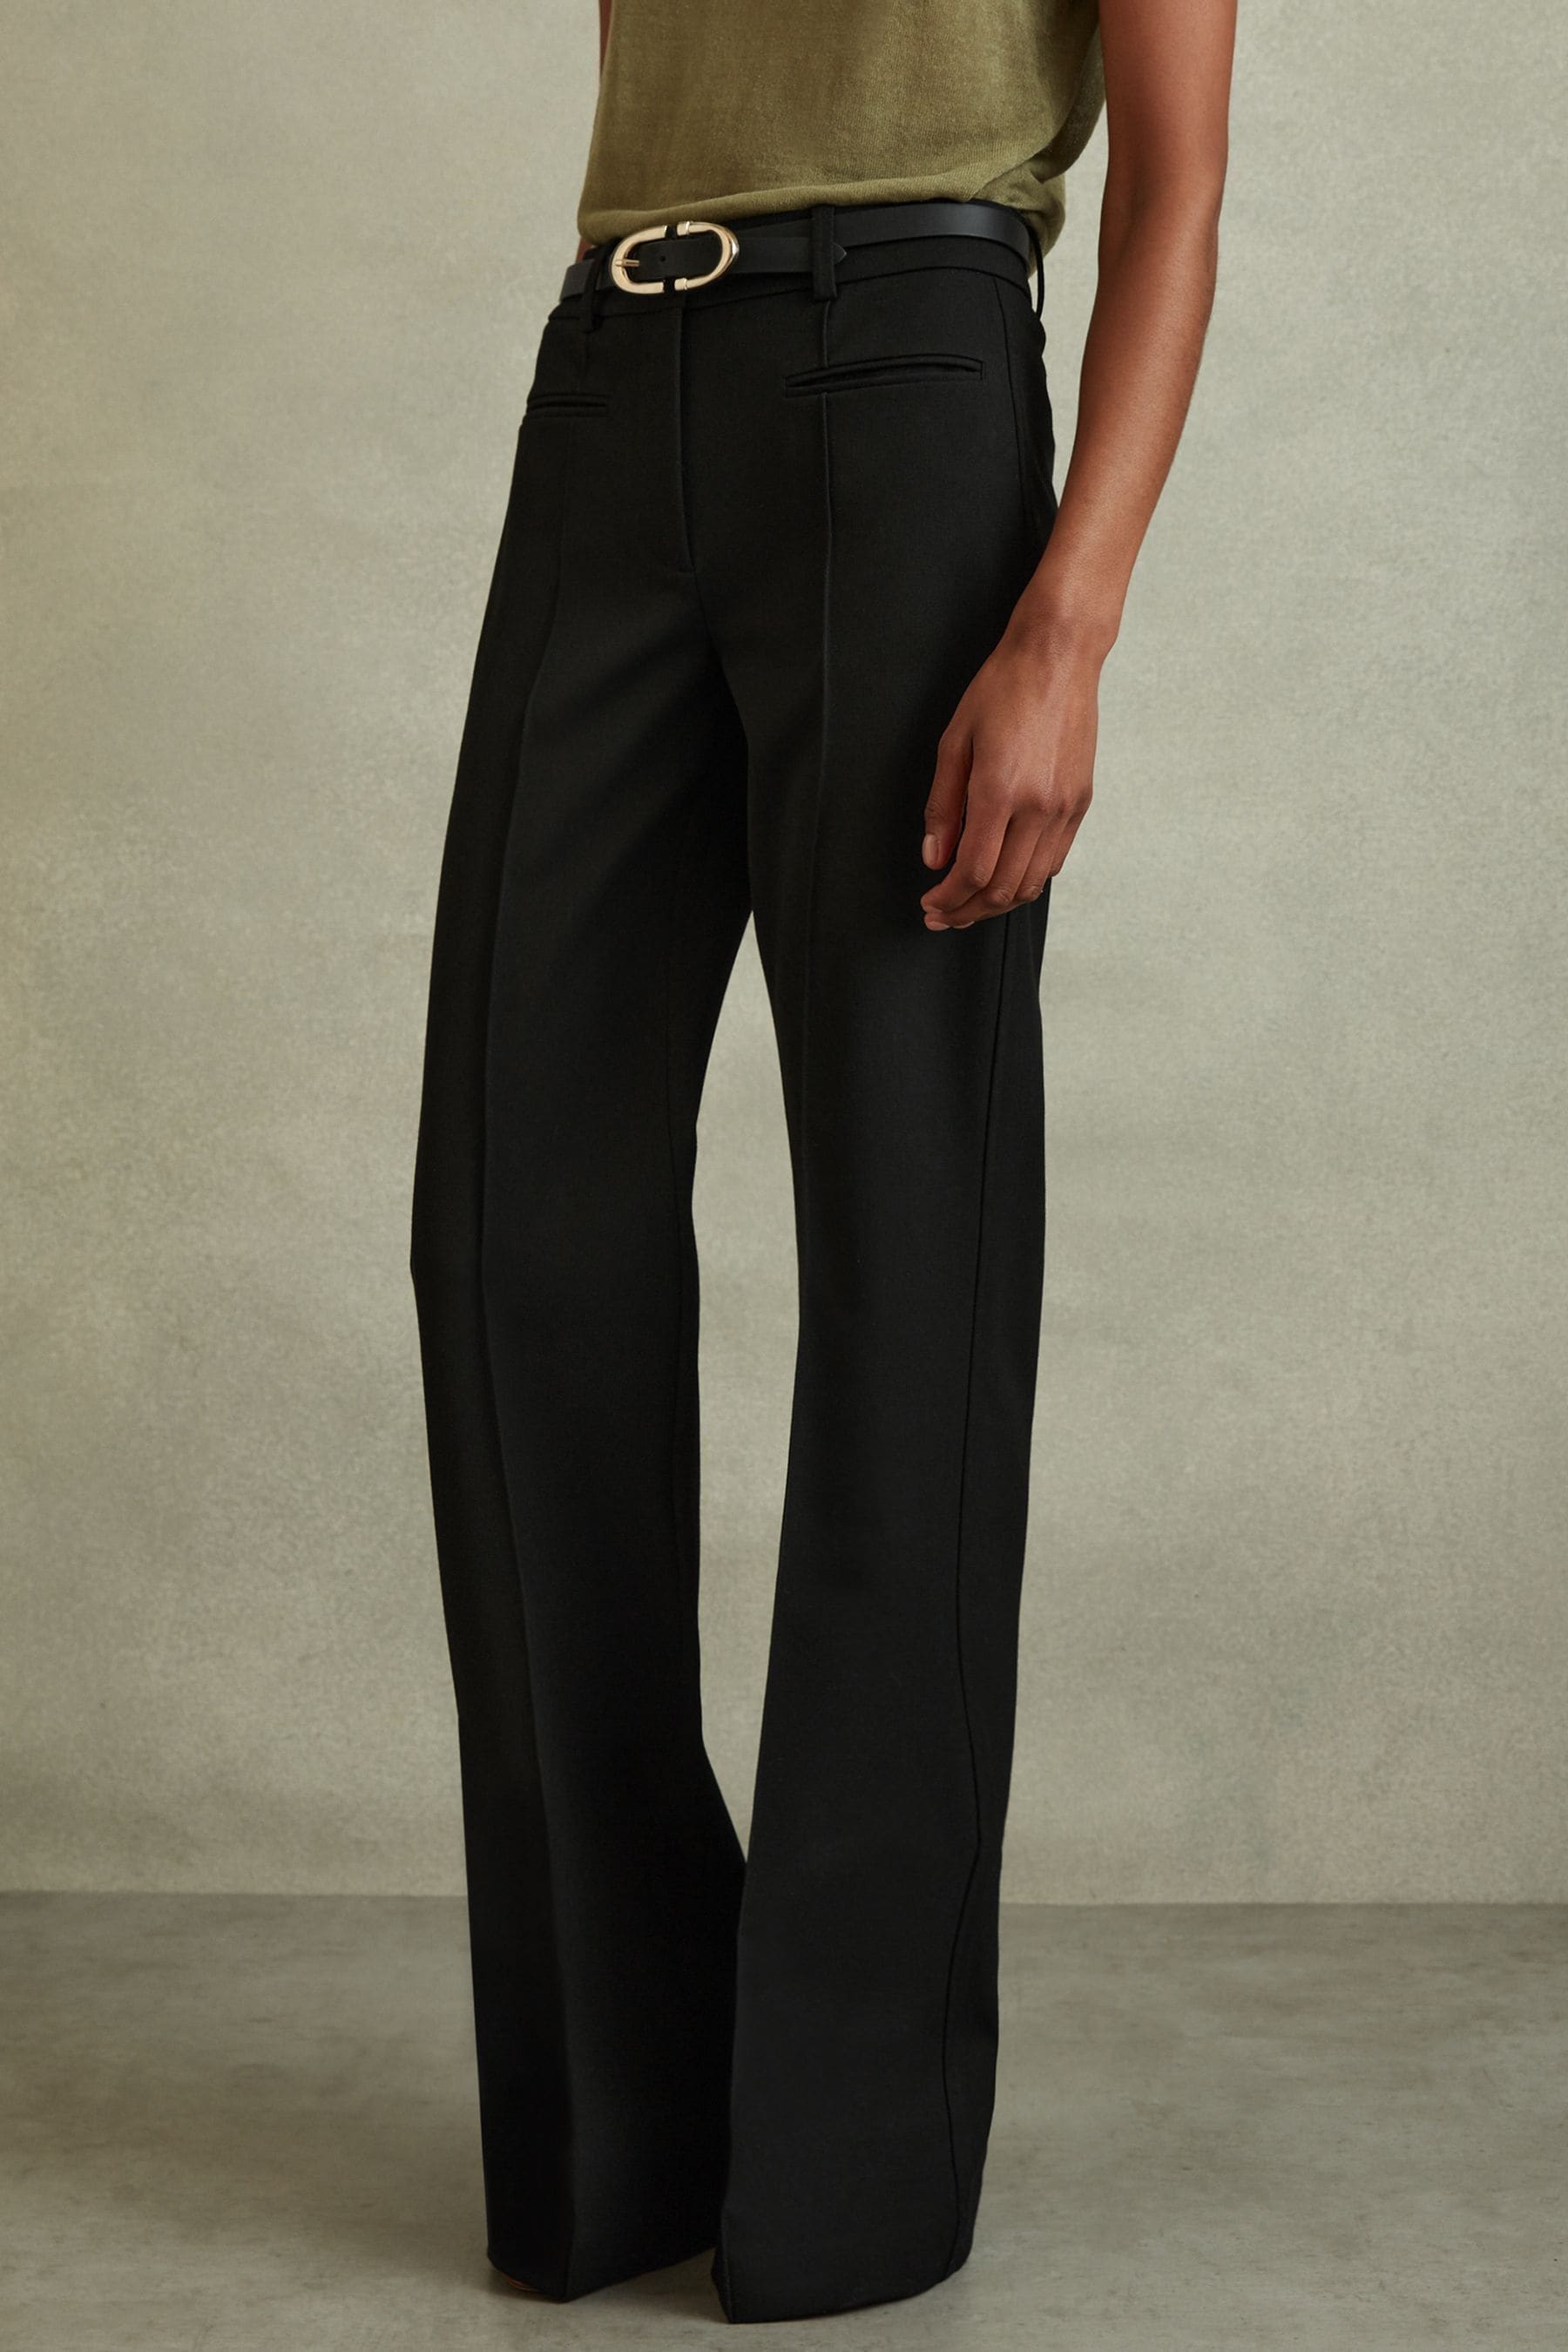 Reiss Claude - Black Petite High Rise Flared Trousers, Us 6